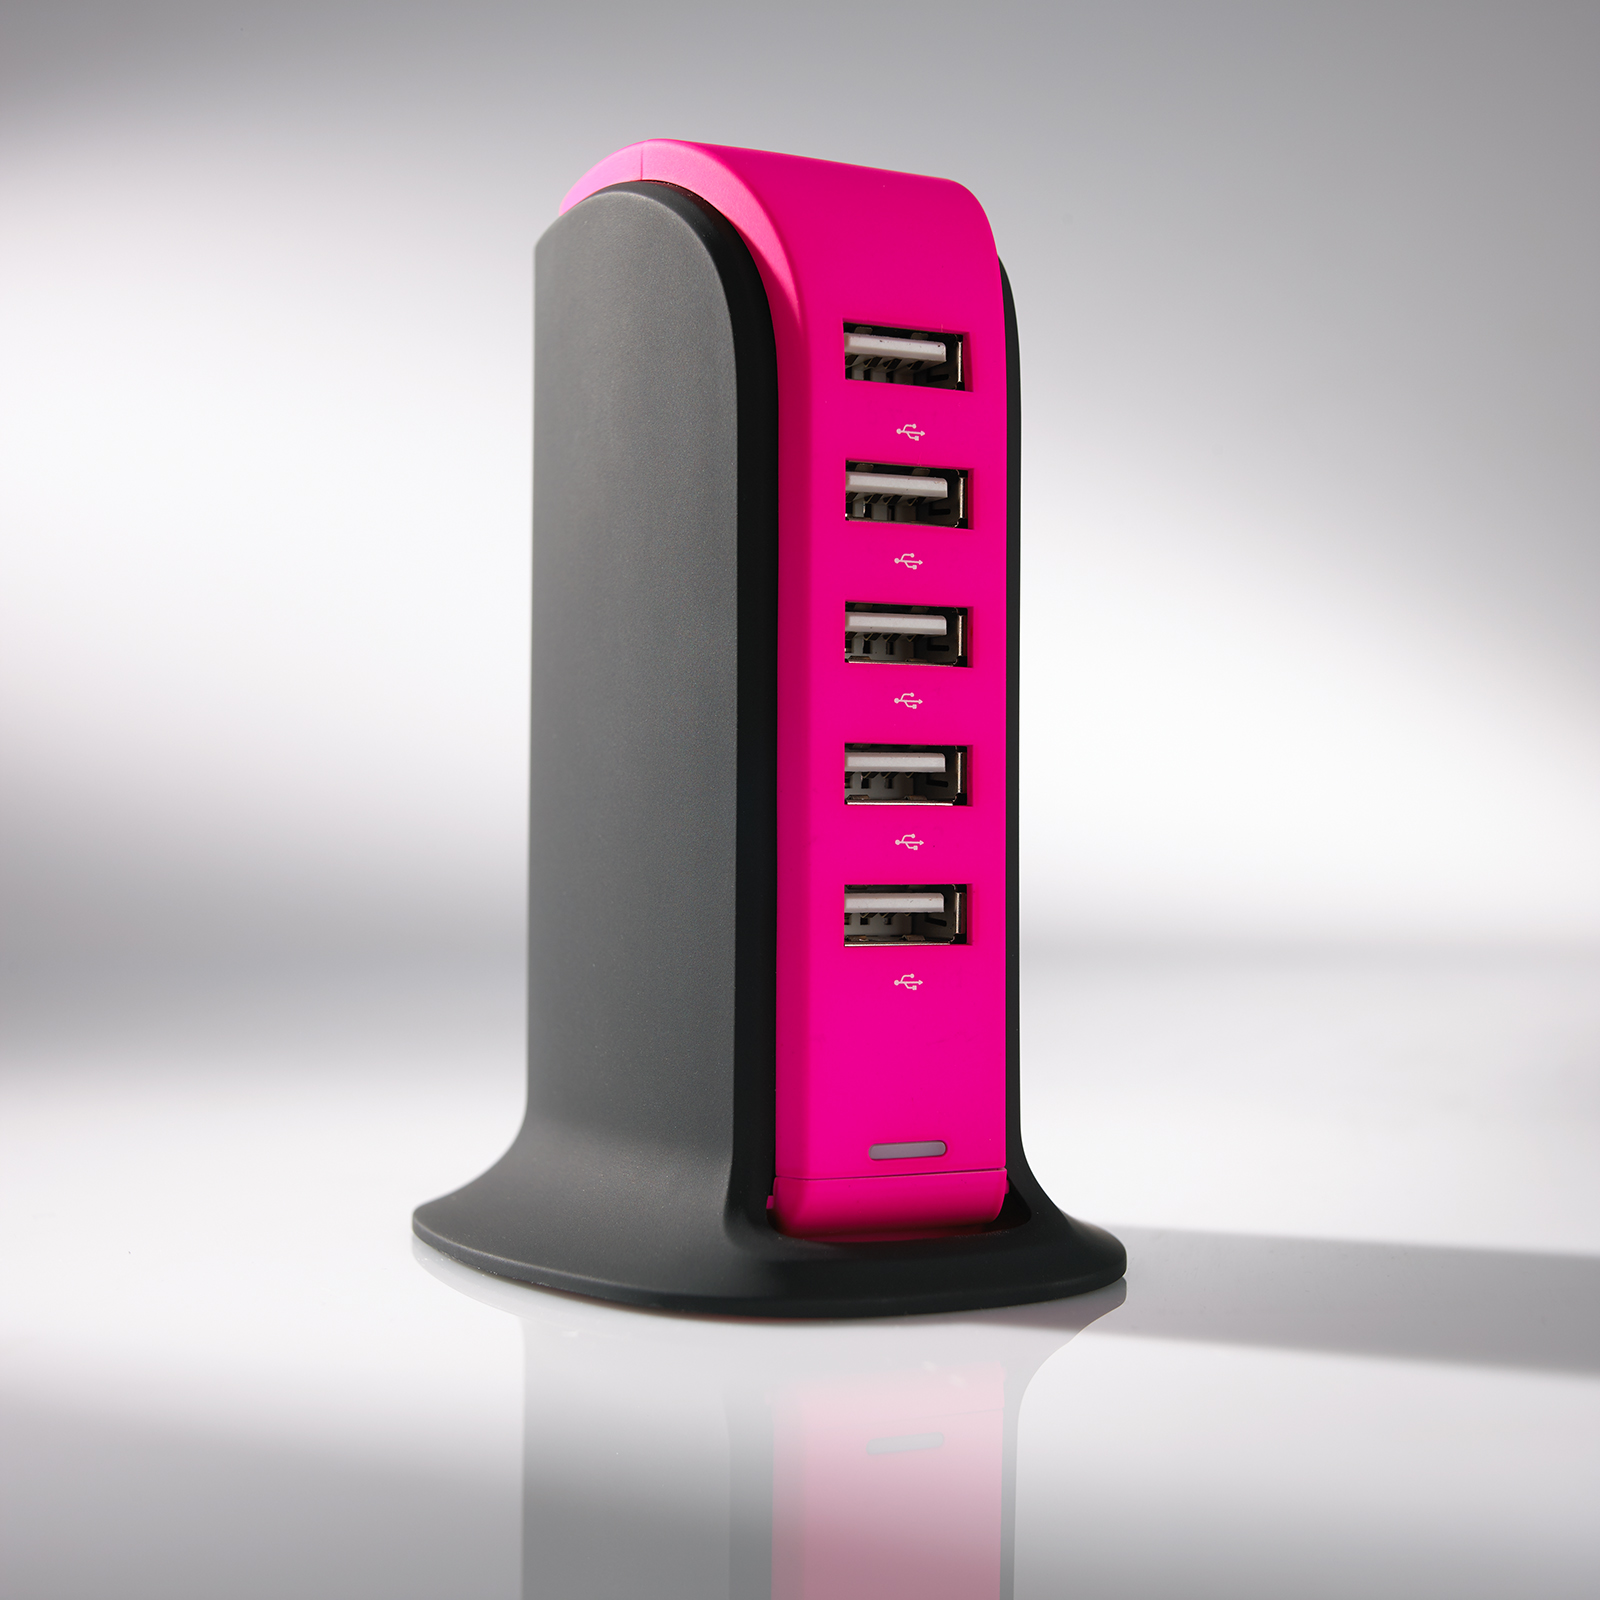 ImPrinted 5 USB CHARGER TOWER PAINTURISSIMO